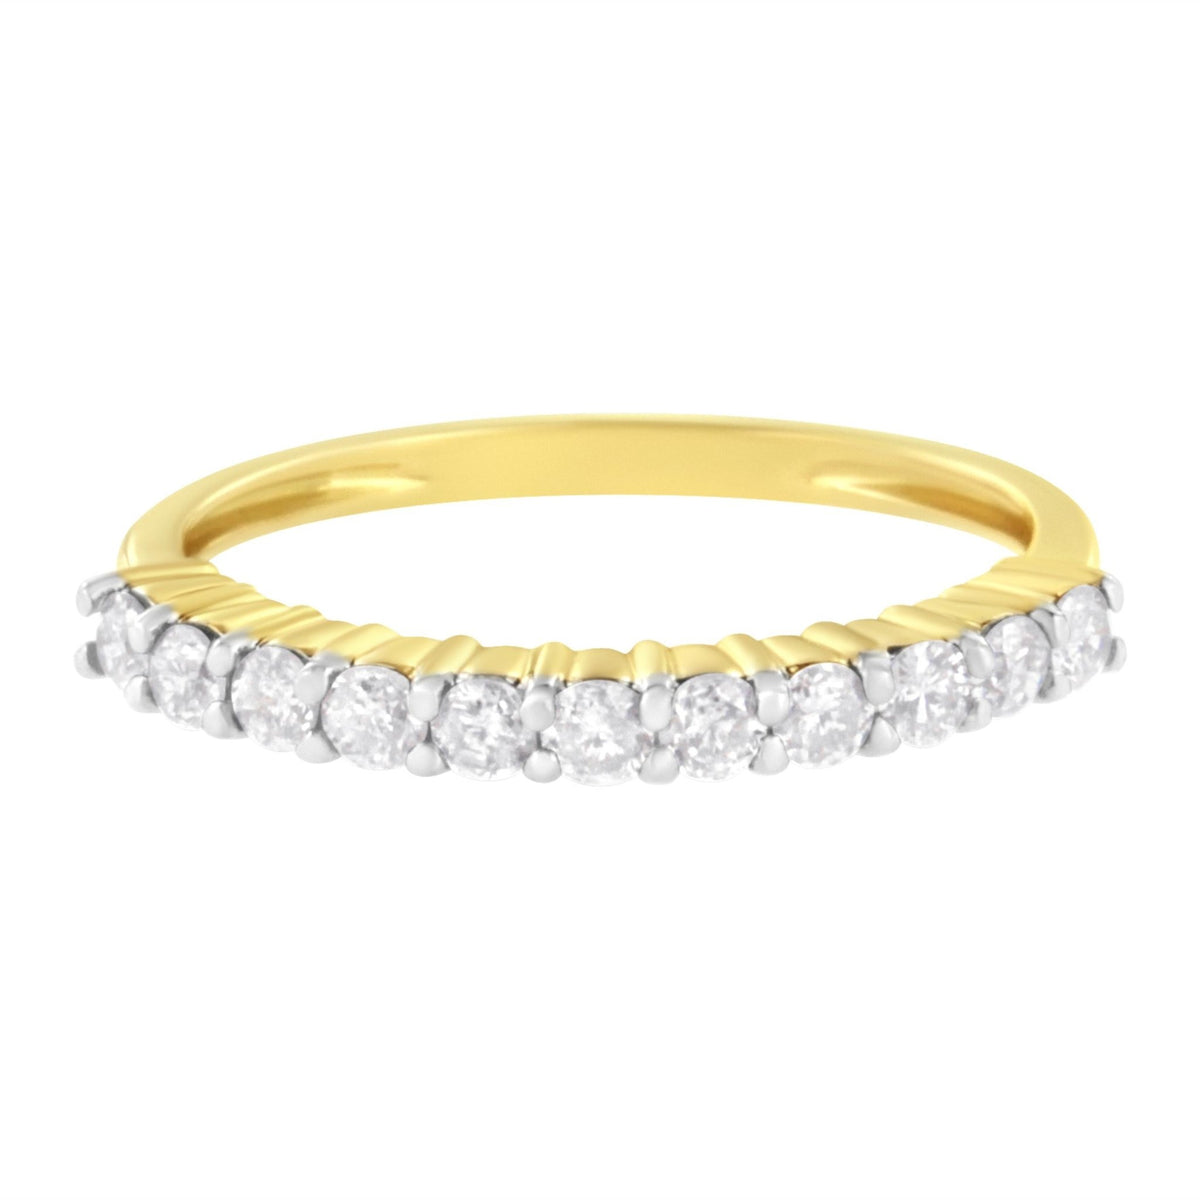 14K Yellow Gold Plated .925 Sterling Silver 1/2 cttw Shared Prong Set Brilliant Round-Cut Diamond 11 Stone Band Ring (I-J Color, SI1-SI2 Clarity) - Size 7 - LinkagejewelrydesignLinkagejewelrydesign